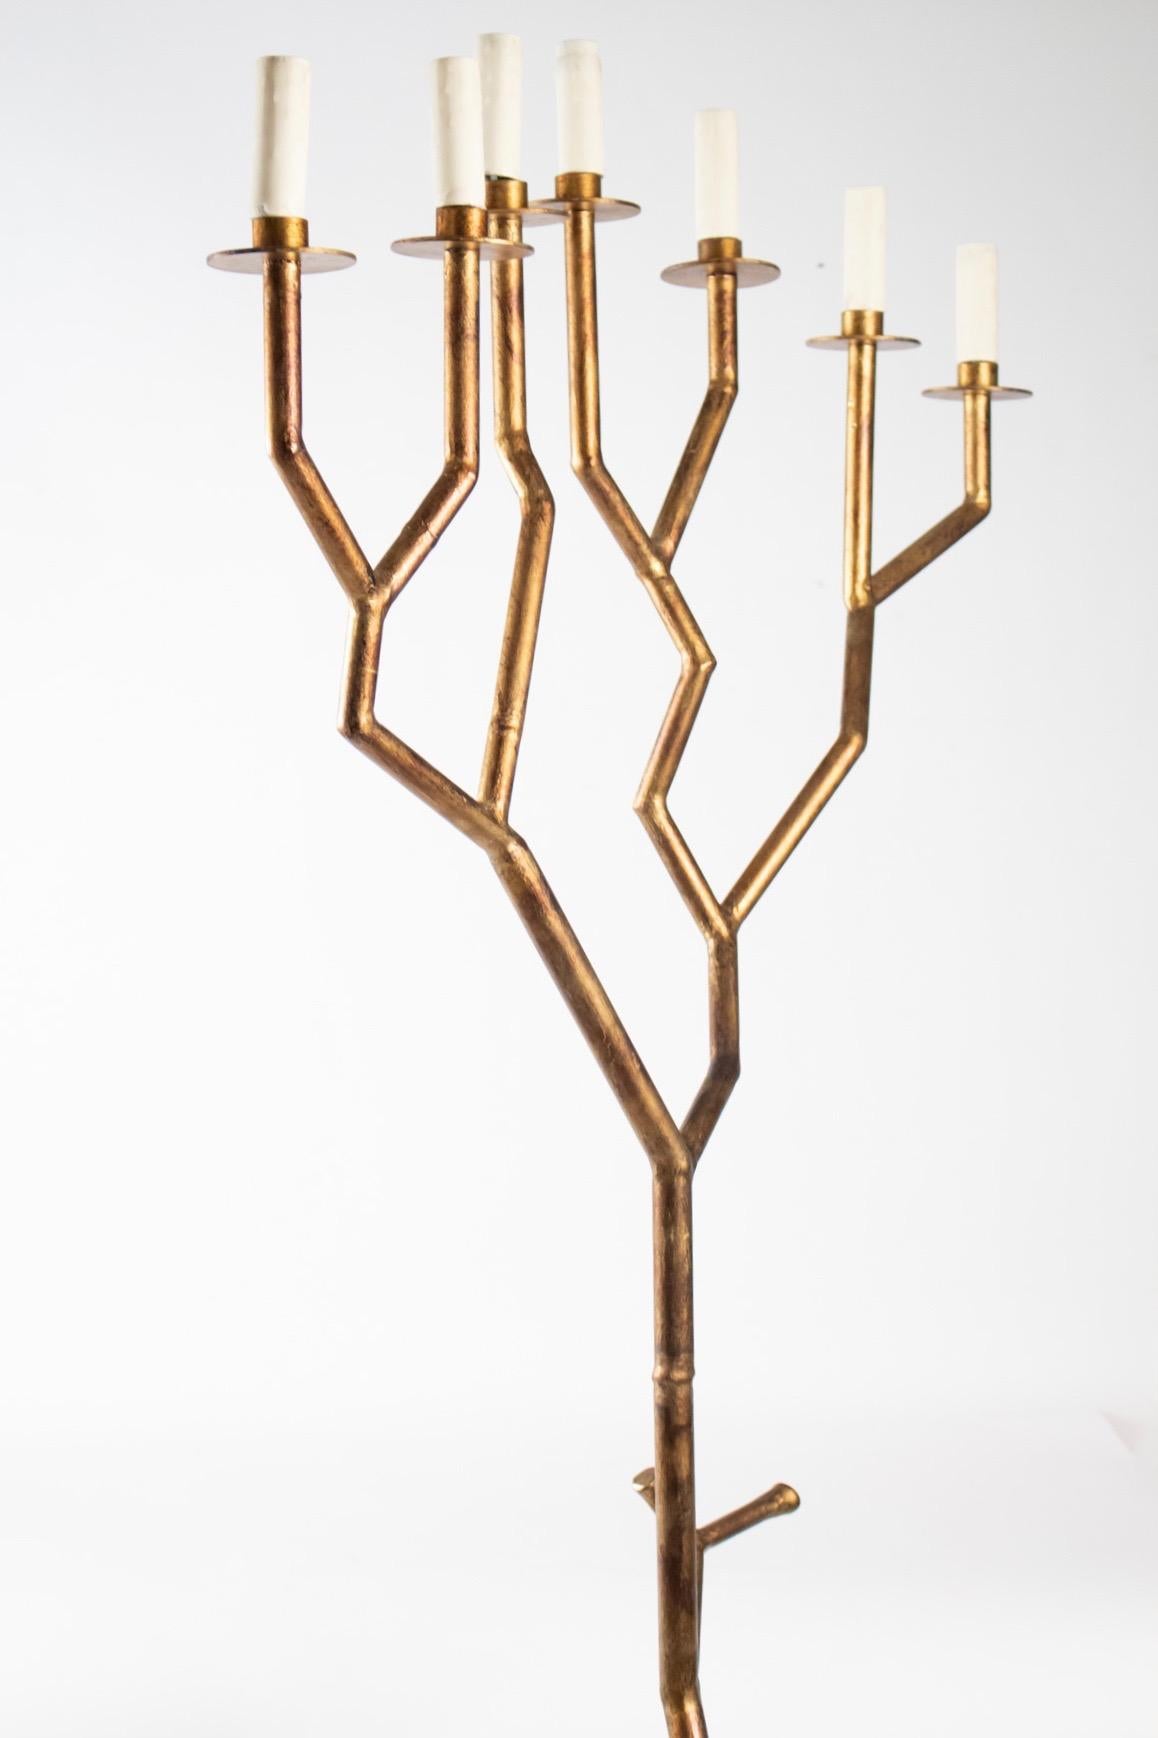 Unique floor lamp made for a private commission from “Ateliers de Ferronneries de la Maison Bataillard” (Maison Bataillard Wrought Iron workshop) founded in 1901.
All made of wrought iron with gilded bronze patina. The floor lamp figures a shrub